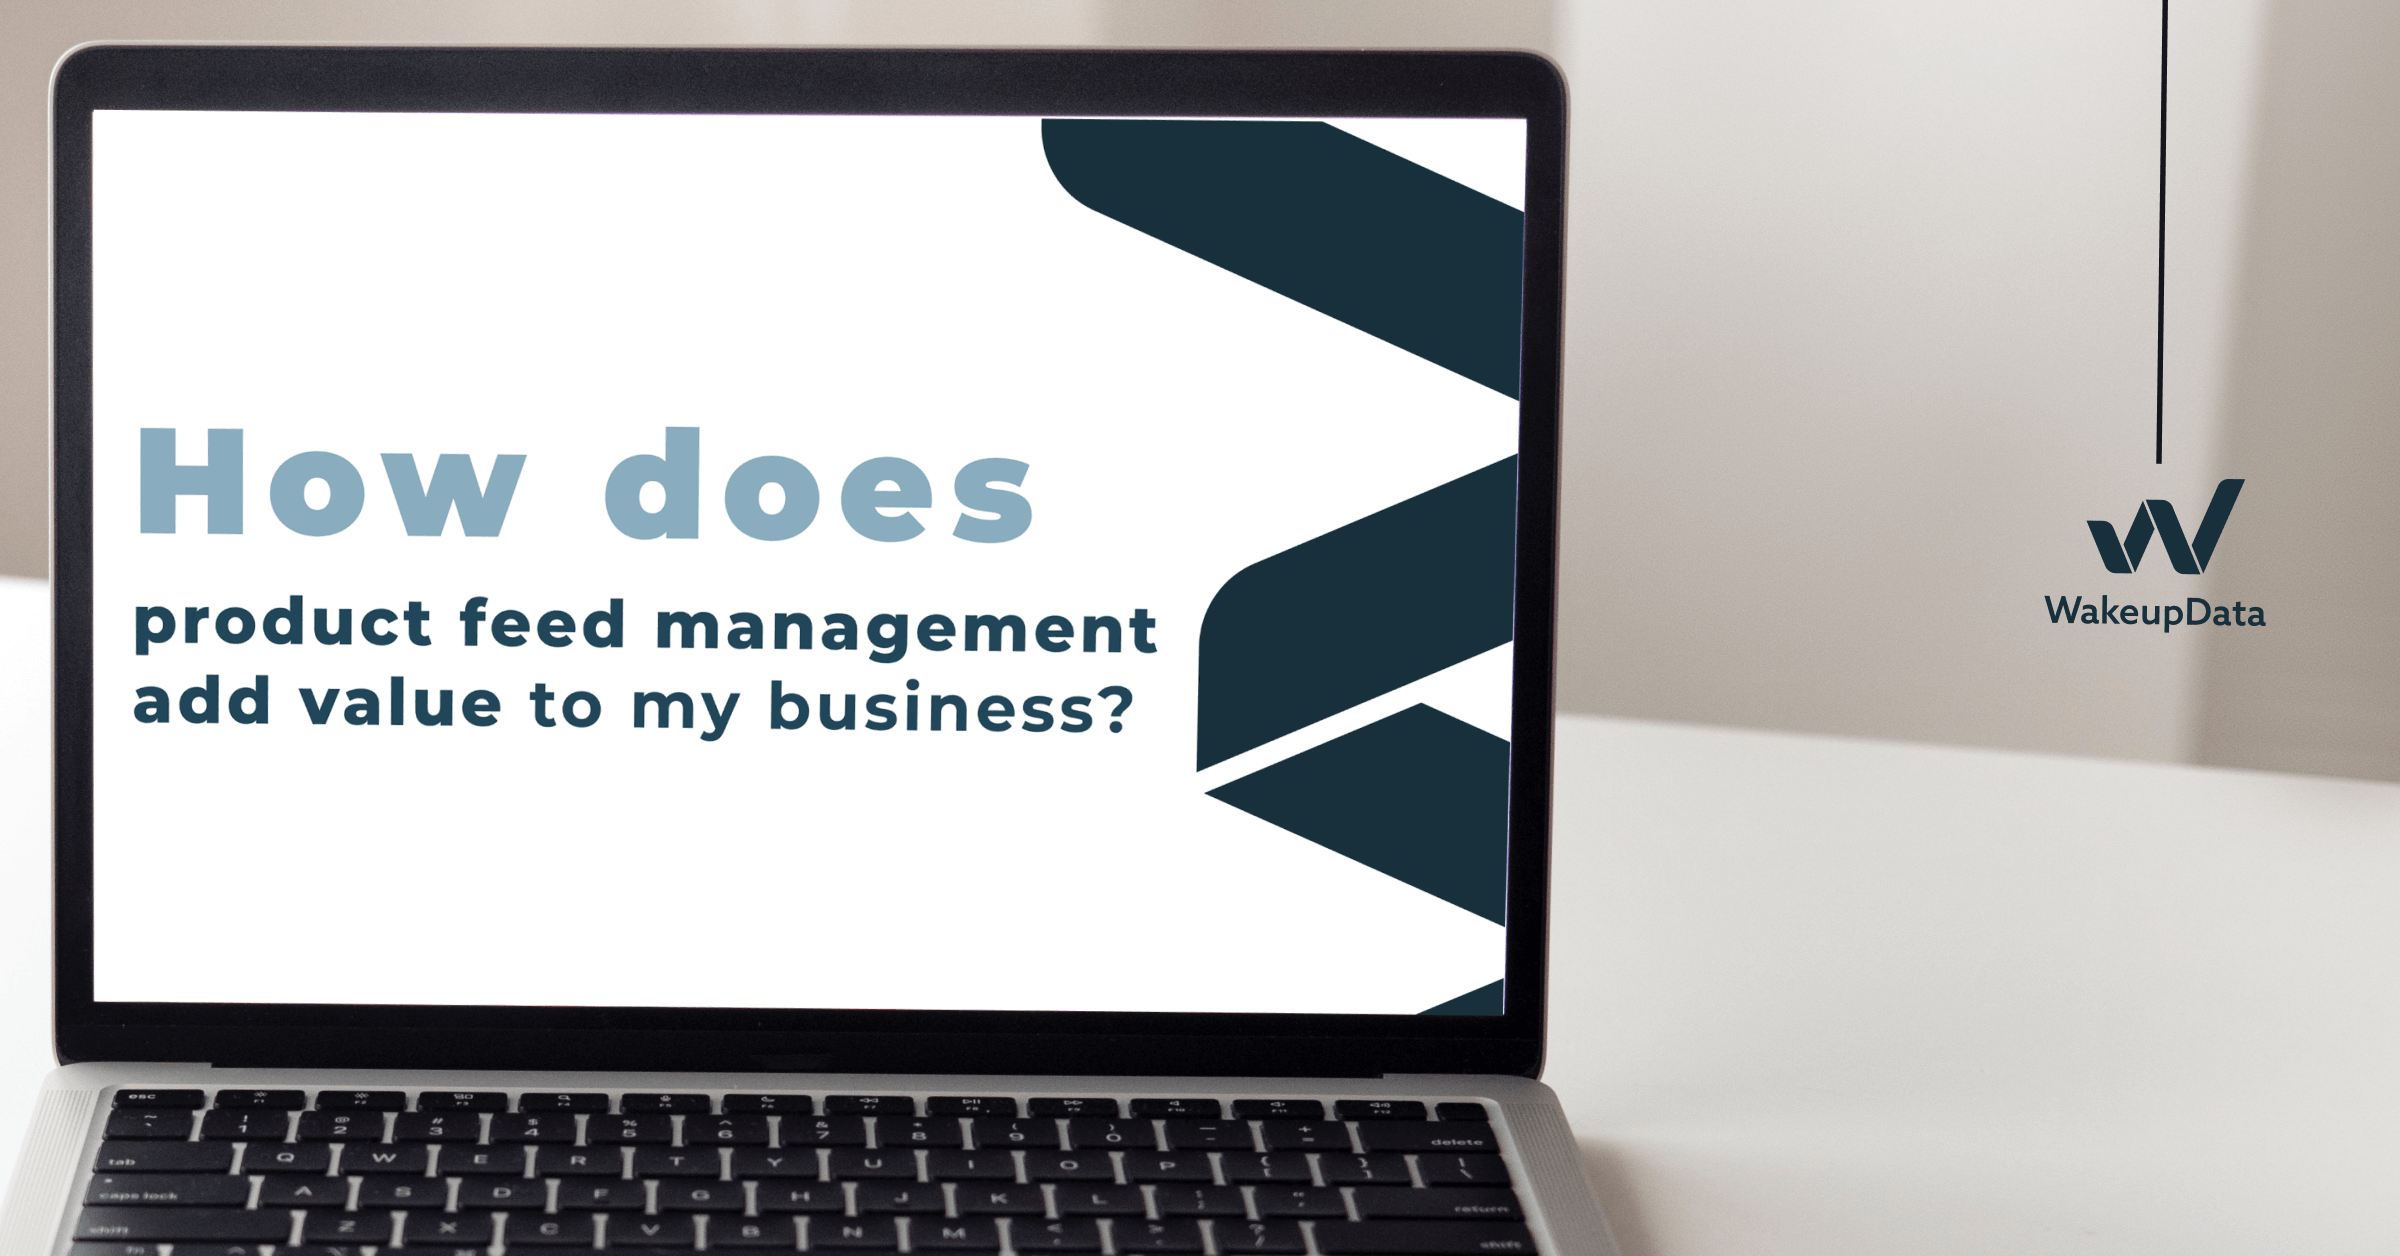 How does product feed management add value to my business